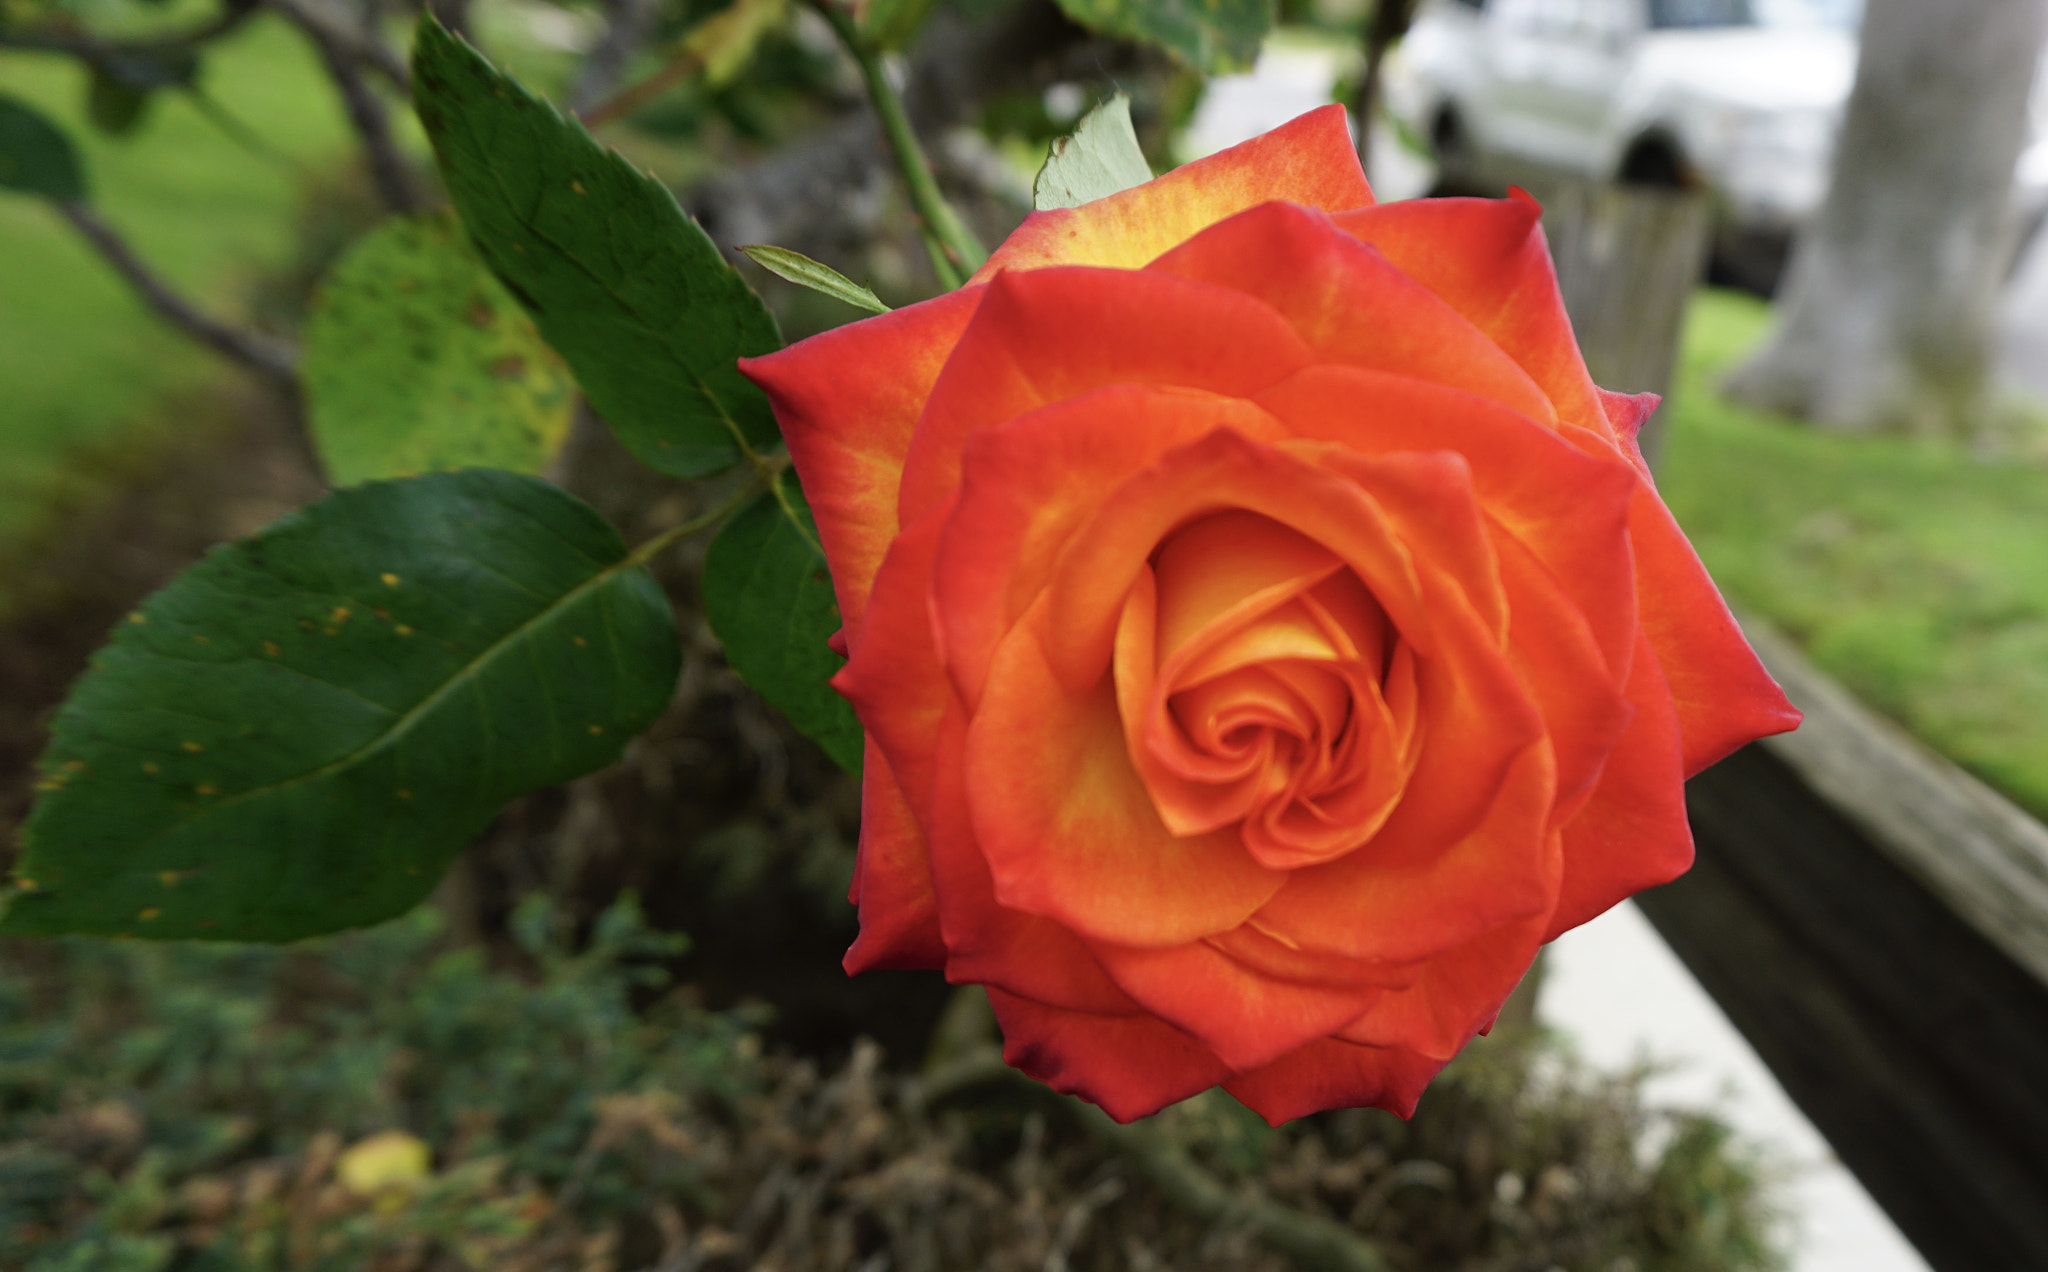 Sony a5100 sample photo. Orange rose by any other name photography